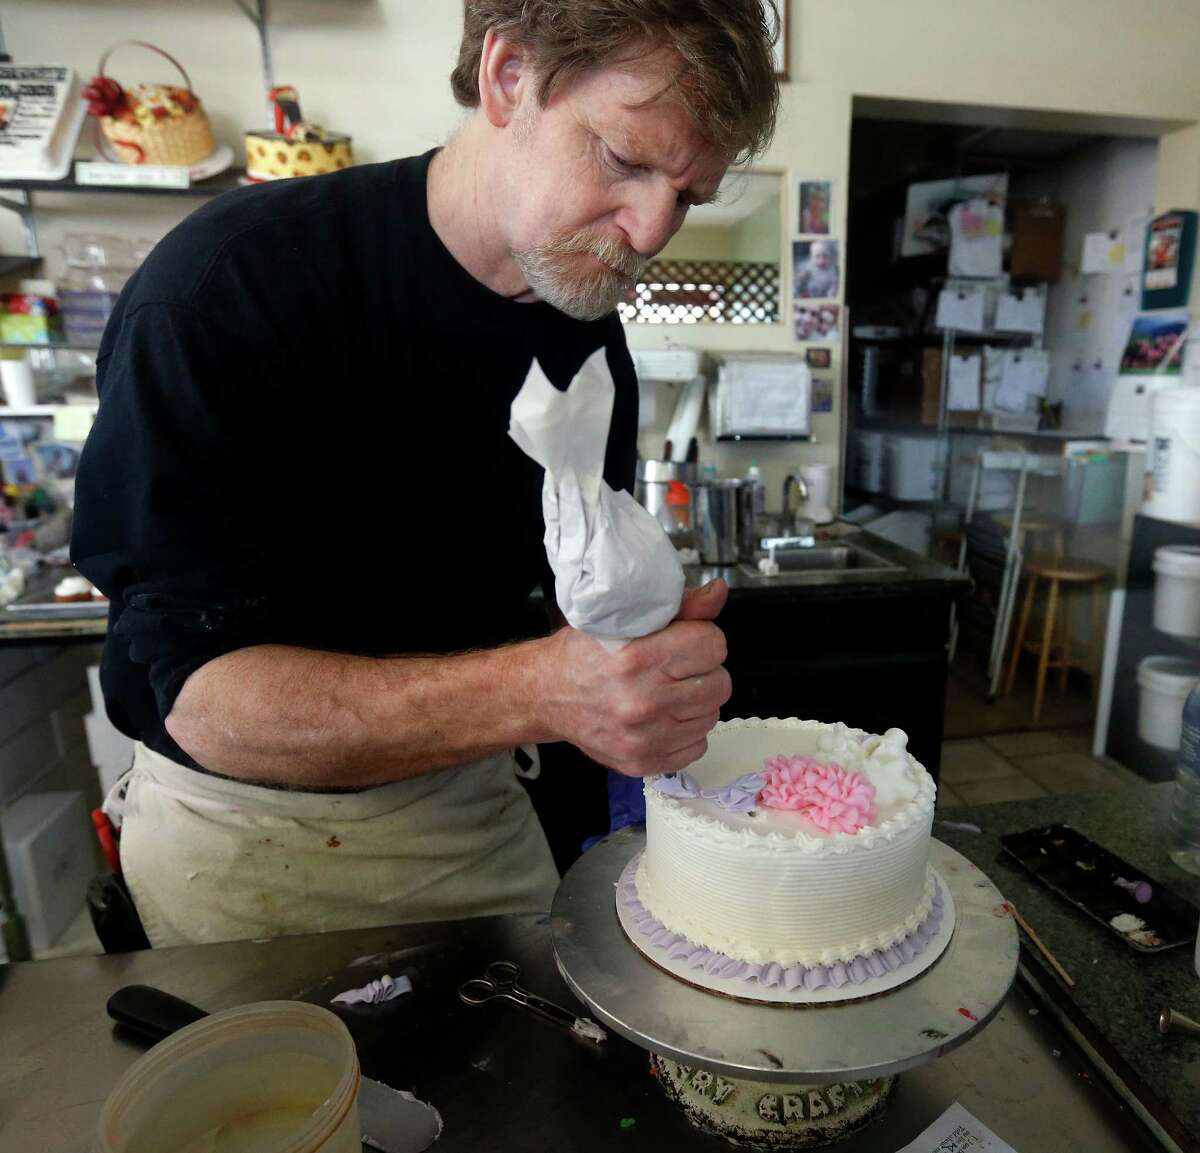 FILE - In this March 10, 2014 file photo, Masterpiece Cakeshop owner Jack Phillips decorates a cake inside his store, in Lakewood, Colo. Phillips a suburban Denver baker who wouldnât make a wedding cake for a same-sex couple cannot cite his religious beliefs in refusing them service because it would lead to discrimination, the Colorado Court of Appeals ruled Thursday, Aug. 13, 2015. (AP Photo/Brennan Linsley, File)